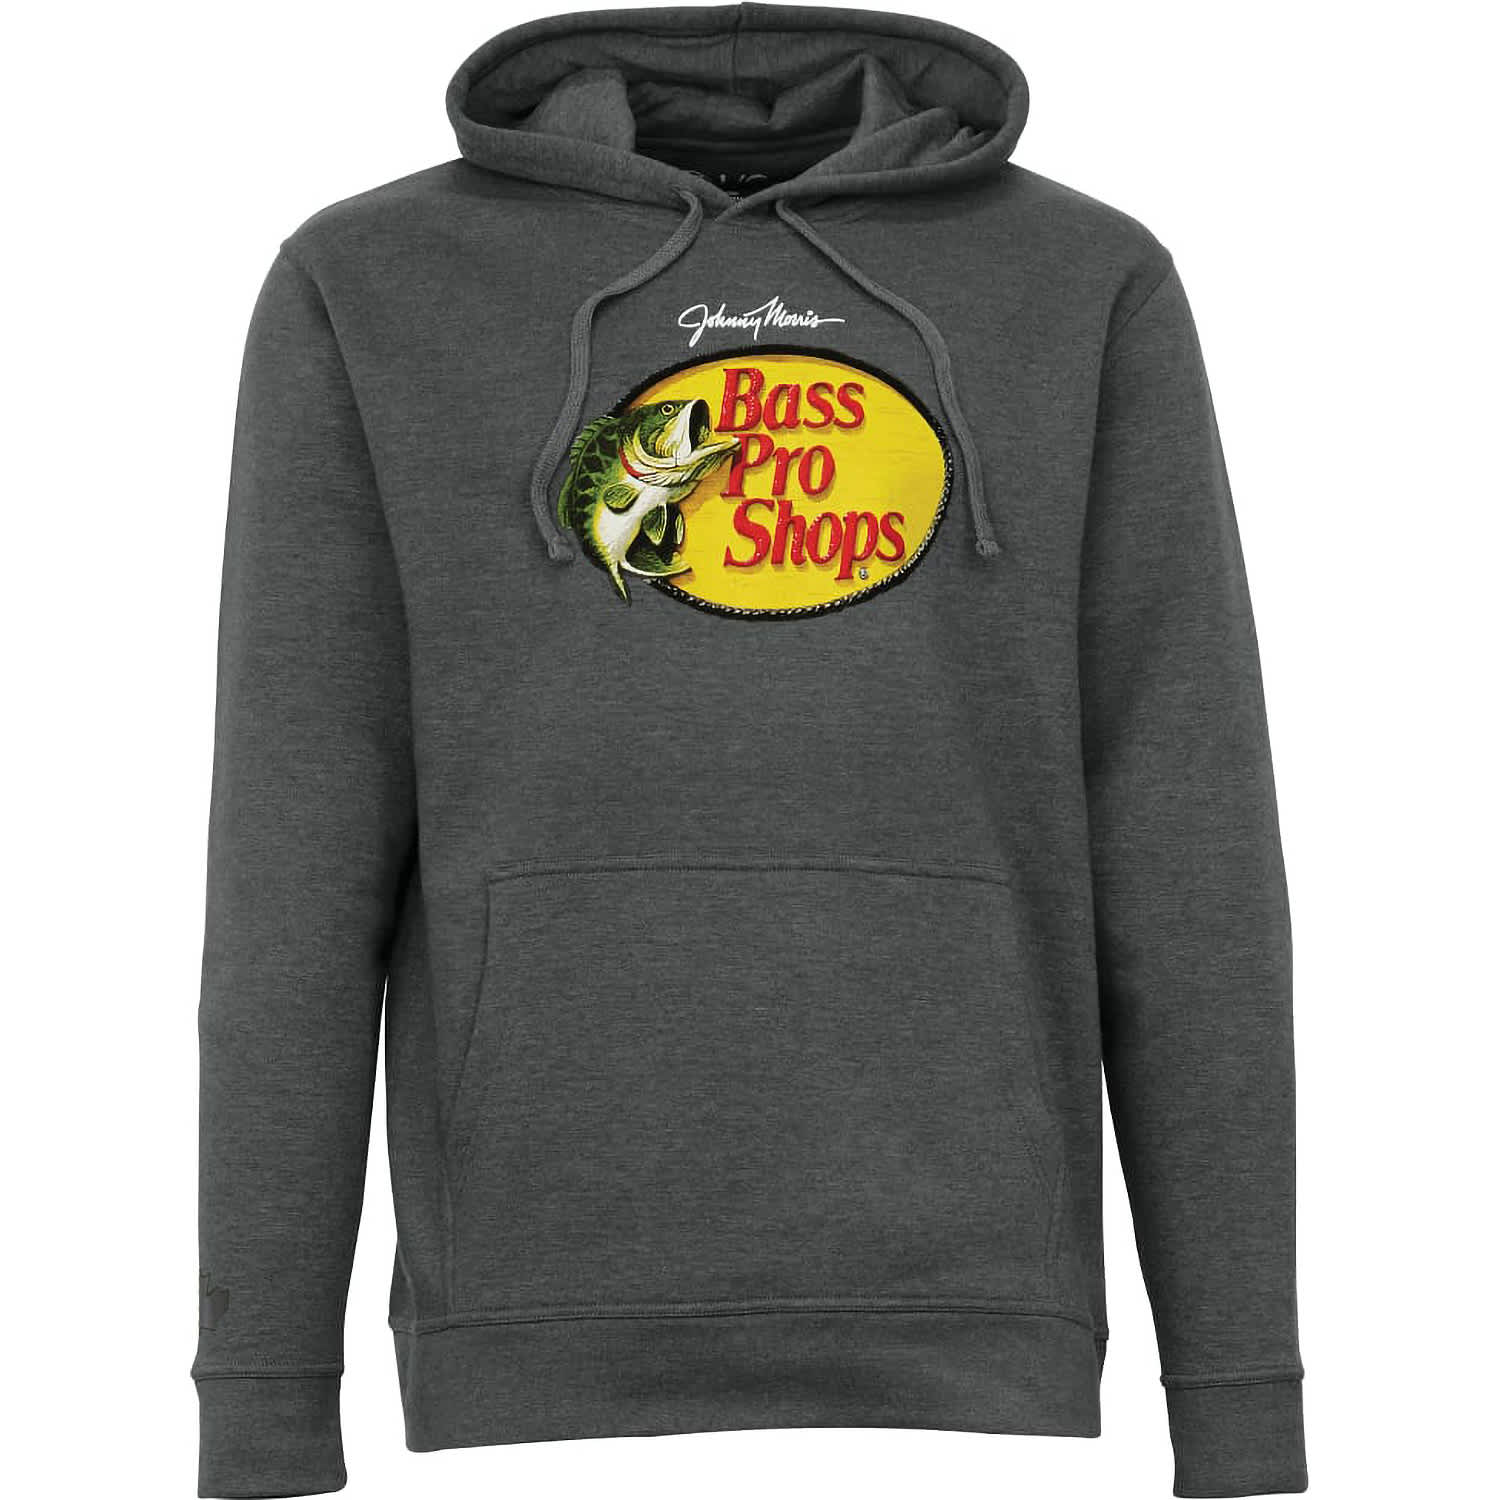 Cabela's or Bass Pro Shops Hoodies for the Family